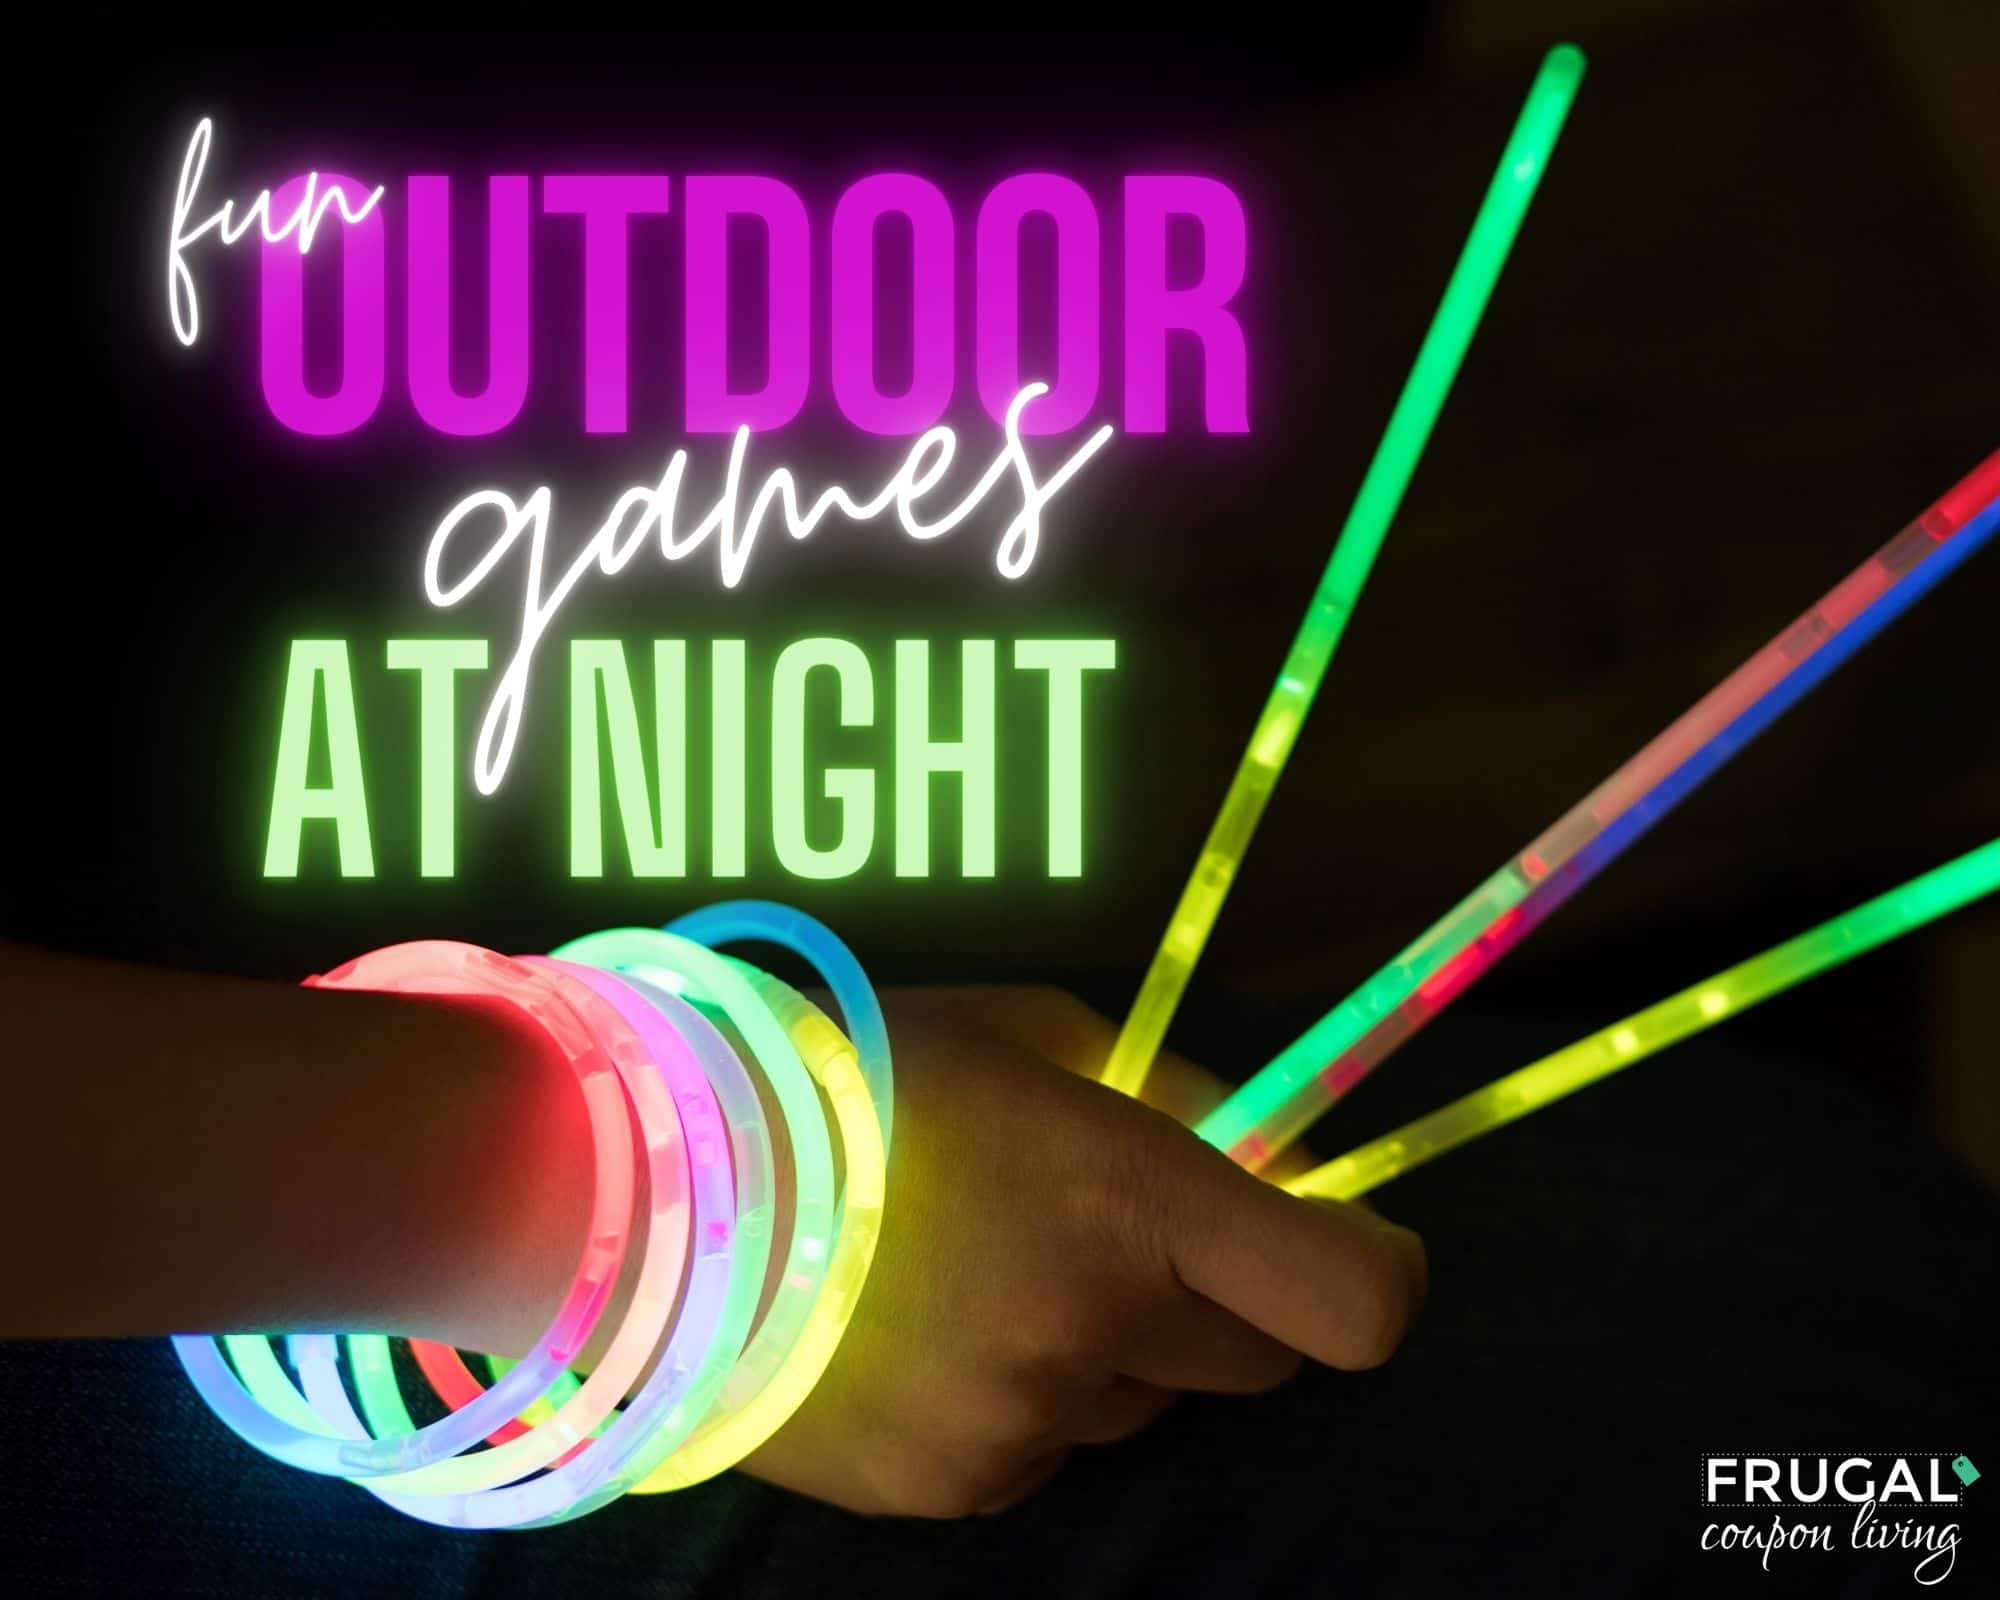 what are good games to play outside with friends at nighttime